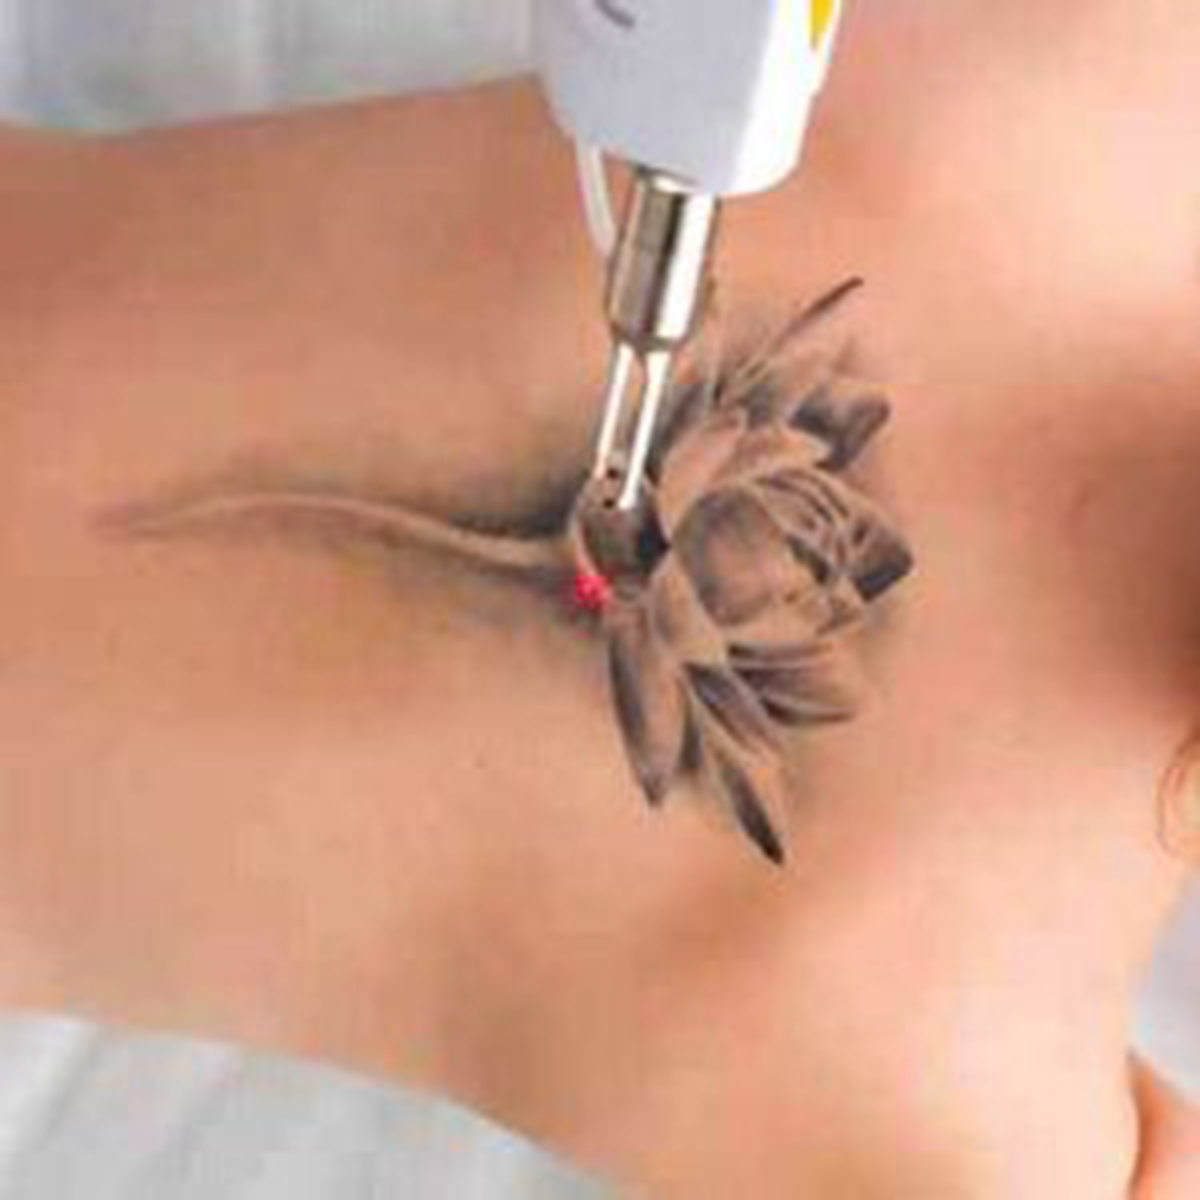 Dr. M. Christine Lee and her team of professionals at The Skin and Laser Treatment Institute welcome patients in the community who are interested in tattoo removal versus traditional coverup tattoos often recommended.